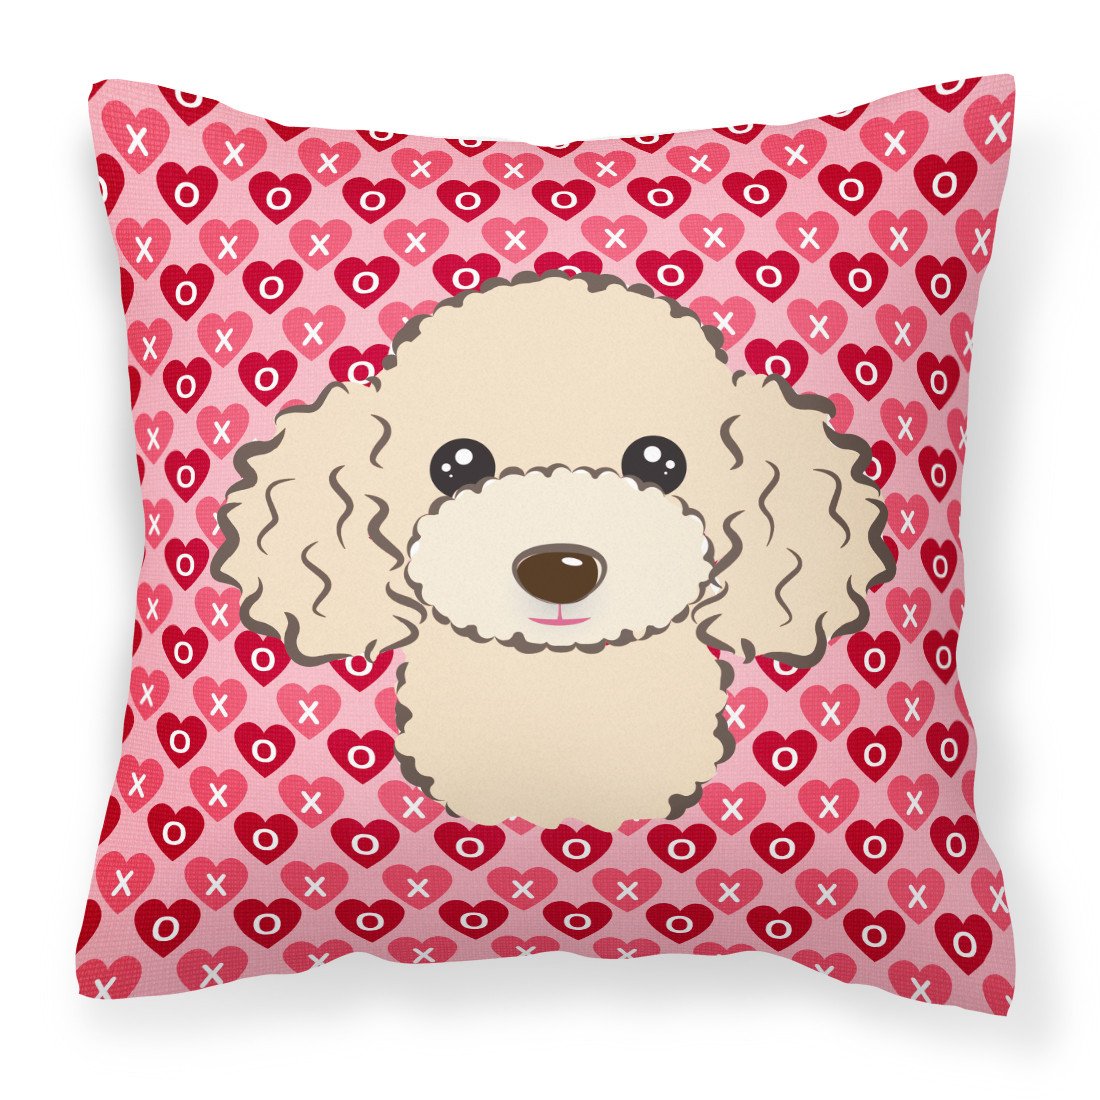 Buff Poodle Hearts Fabric Decorative Pillow BB5328PW1818 by Caroline's Treasures